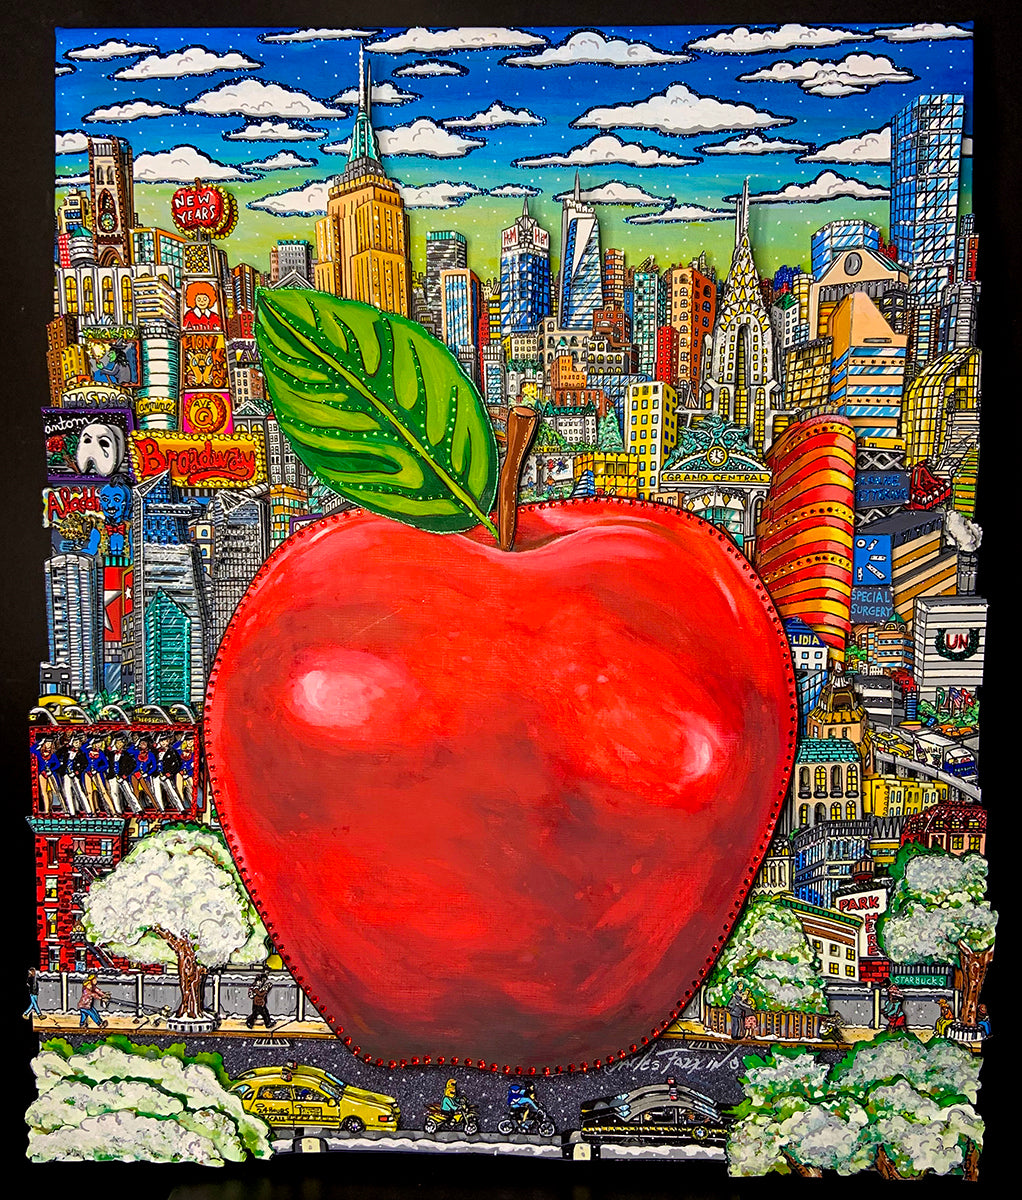 The Big Red Apple in the Center of NYC - Original